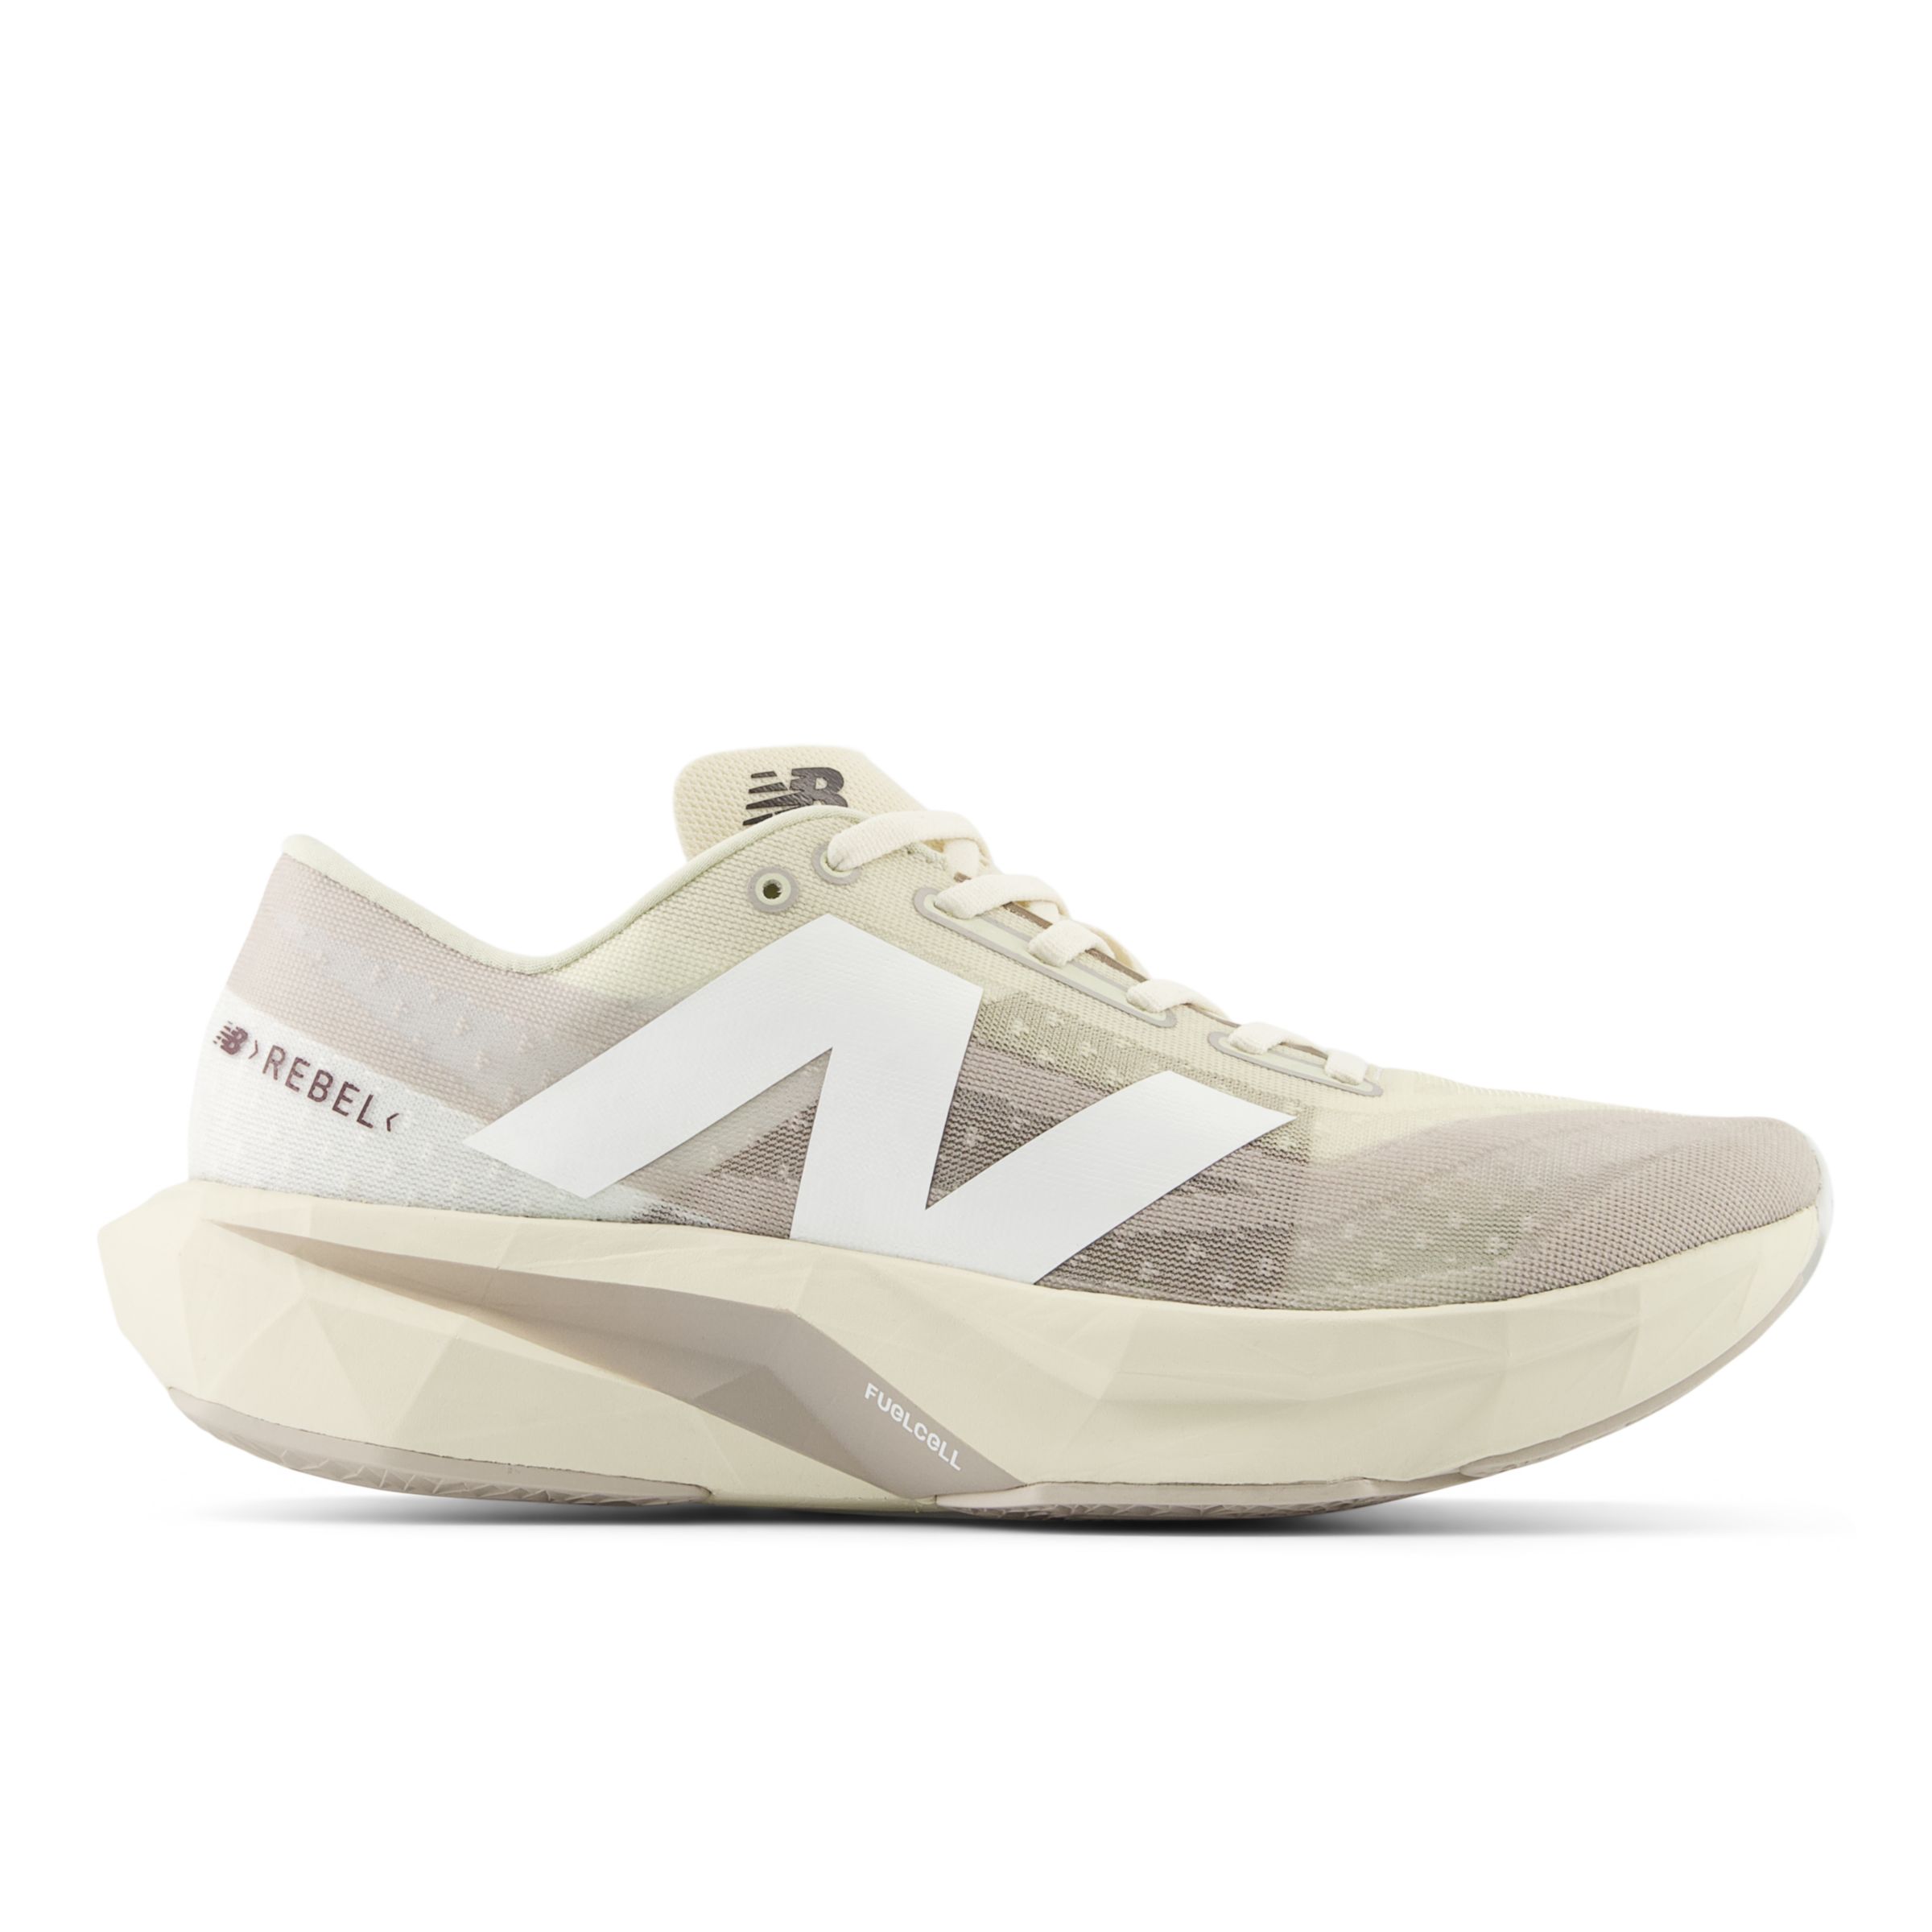 New Balance Femme Sydney's Signature Collection FuelCell Rebel v4 en Beige/Gris/Blanc/Marron, Synthetic, Taille 40.5